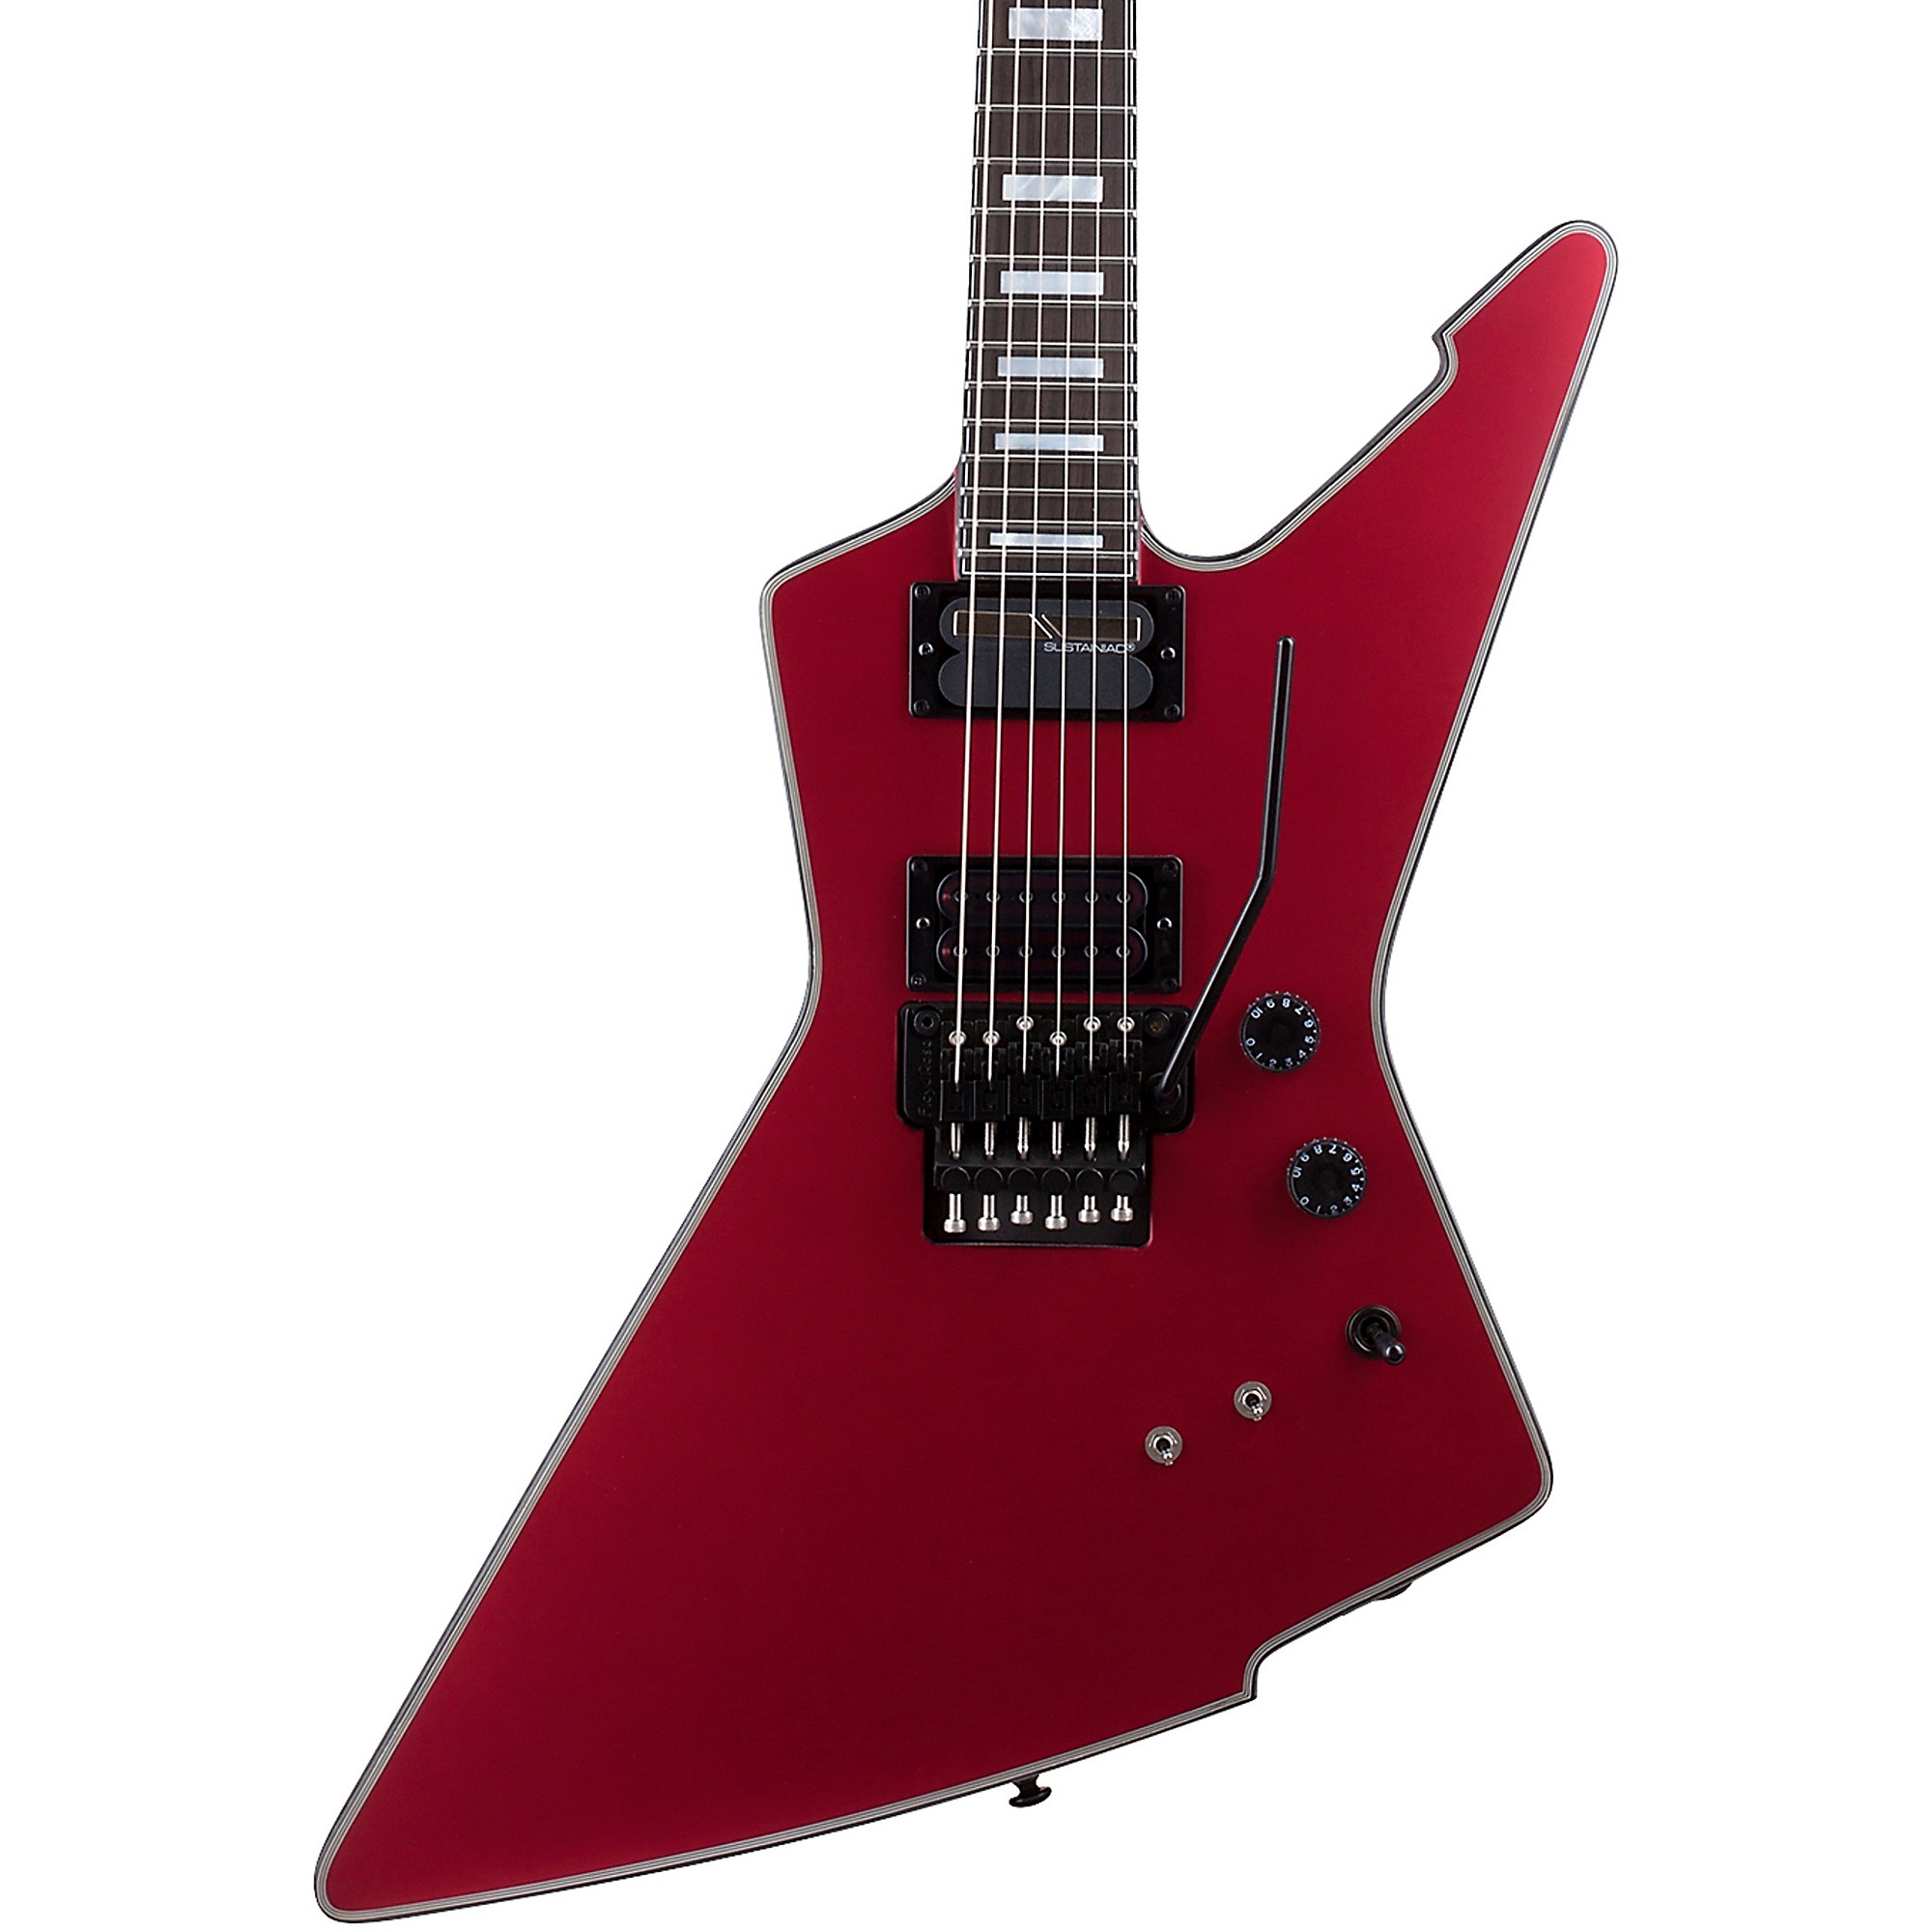 Электрогитара Schecter Guitar Research E-1 FR S Special Edition Satin Candy Apple Red